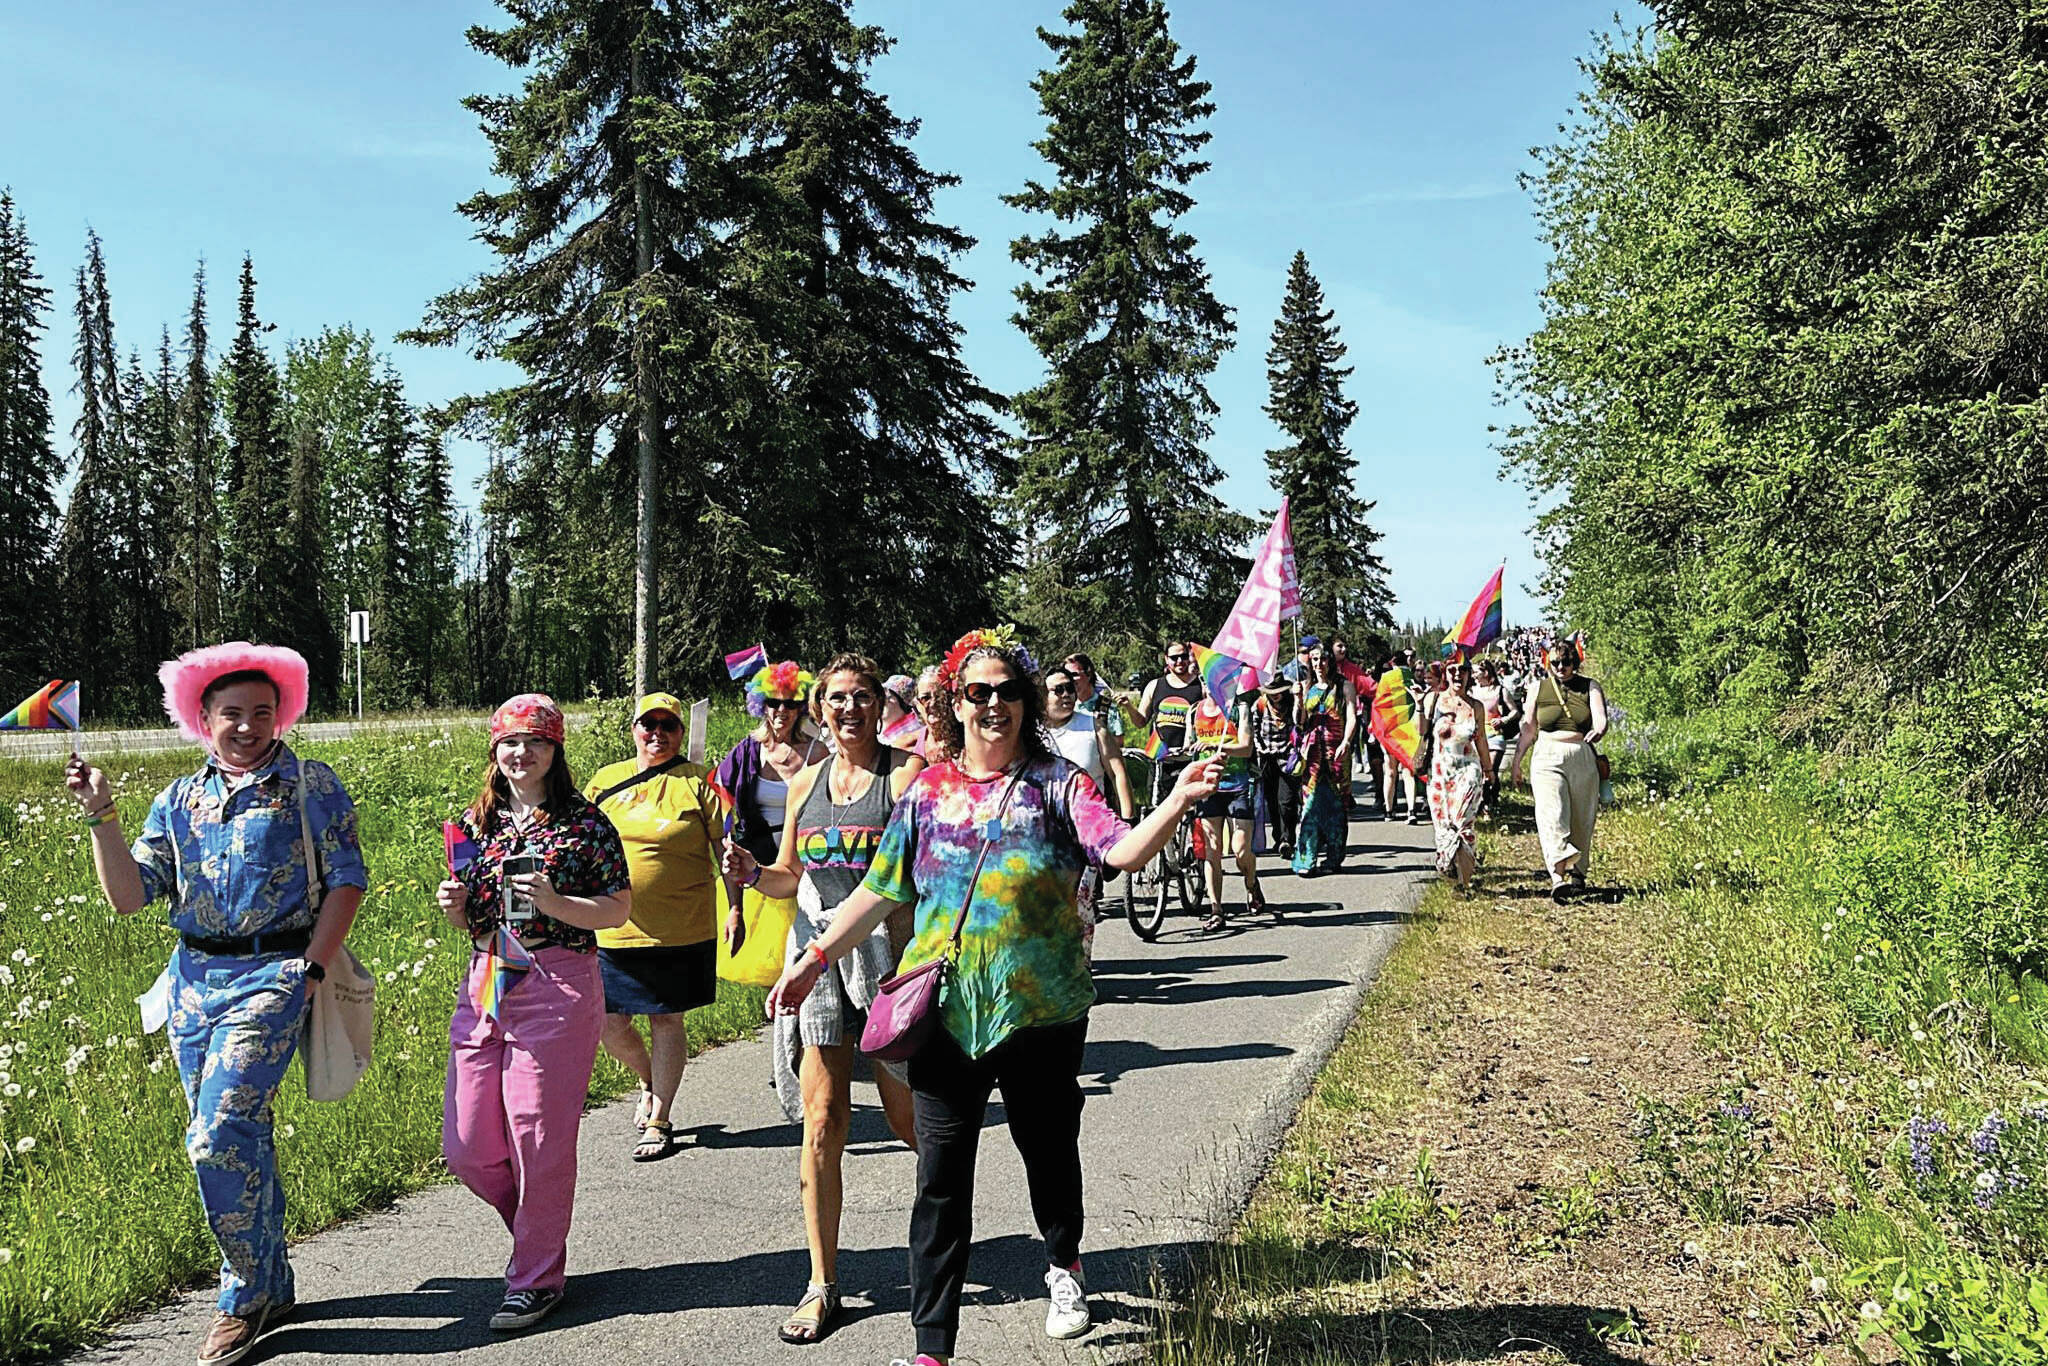 The Two-Spirit March, part of Soldotna Pride’s Pride in the Park, proceeds along Kalifornsky Beach Road in Soldotna<ins>, Alaska,</ins> on Saturday, June 22<ins>, 2024</ins>. (Photo by Michele Vasquez, provided by Soldotna Pride)